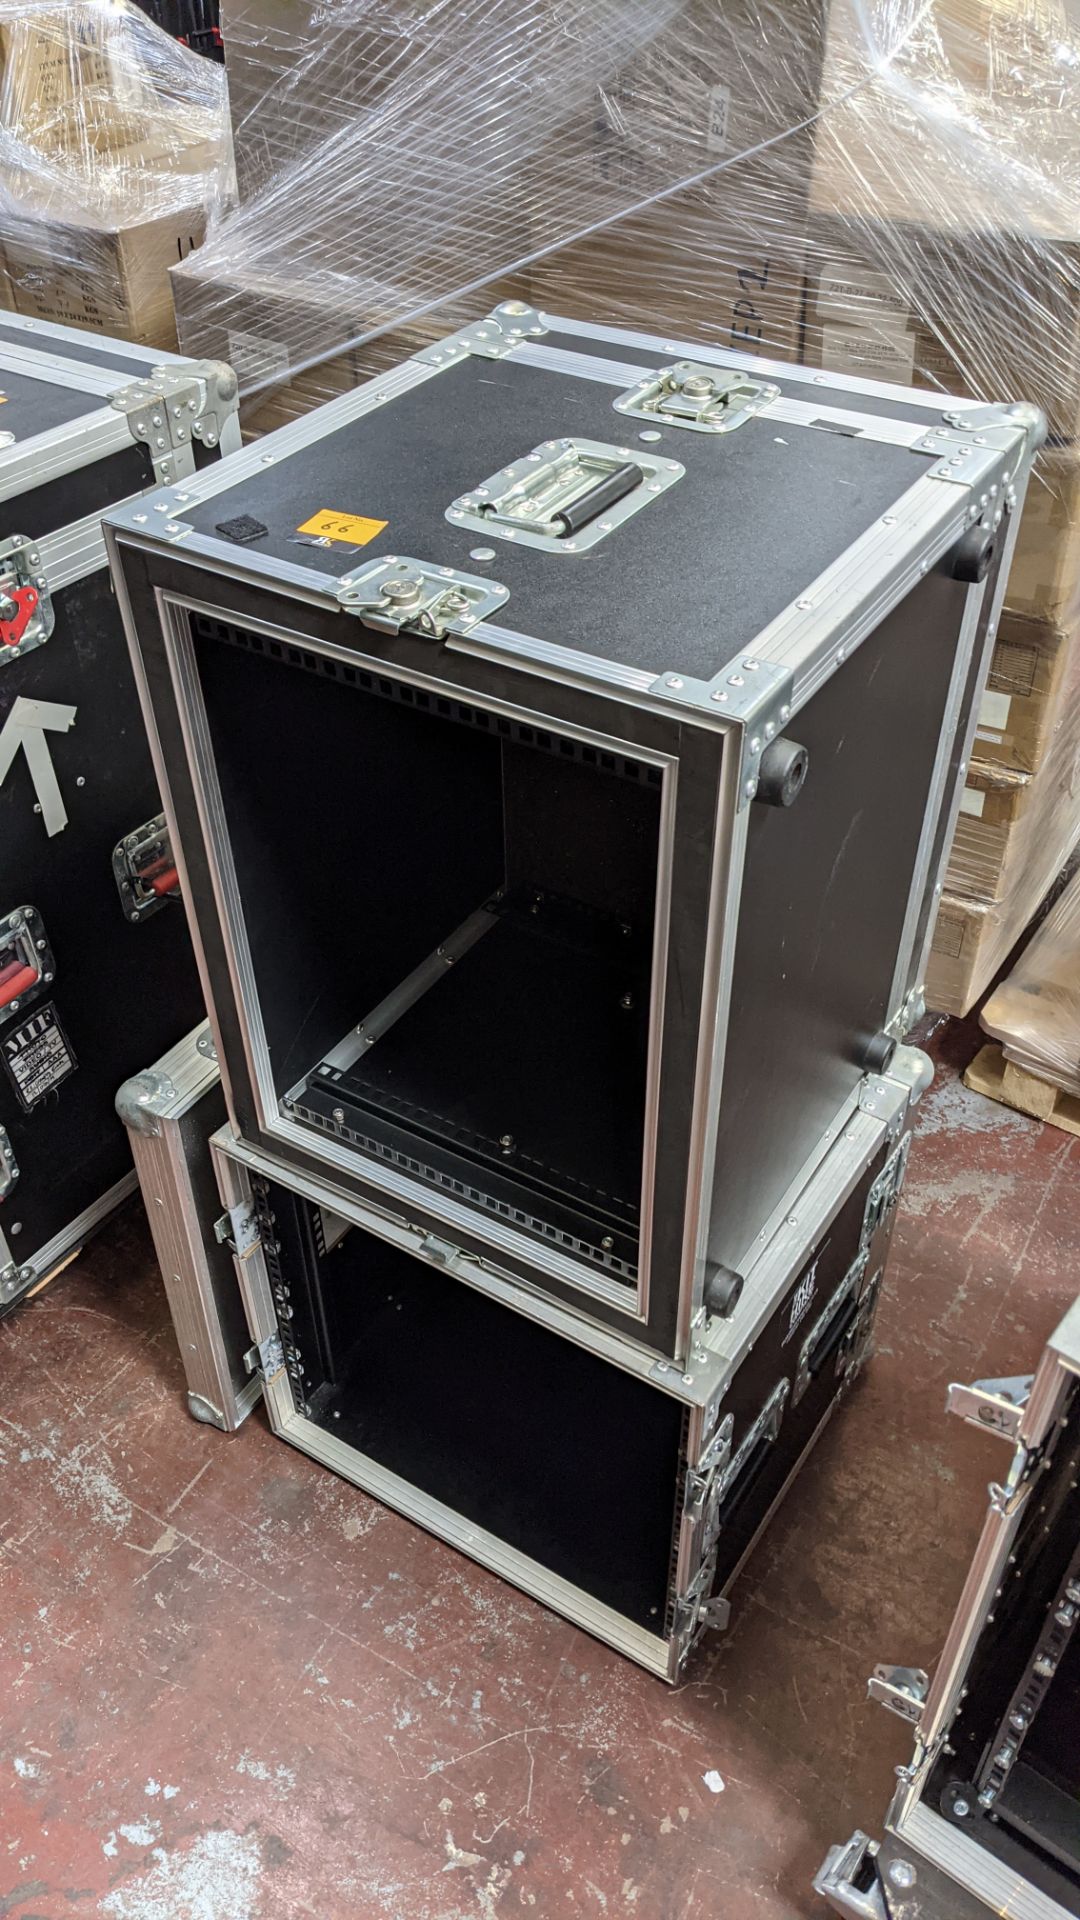 2 off racks comprising 1 off 8U & 1 off 10U, both incorporated into flight cases, one with a clip on